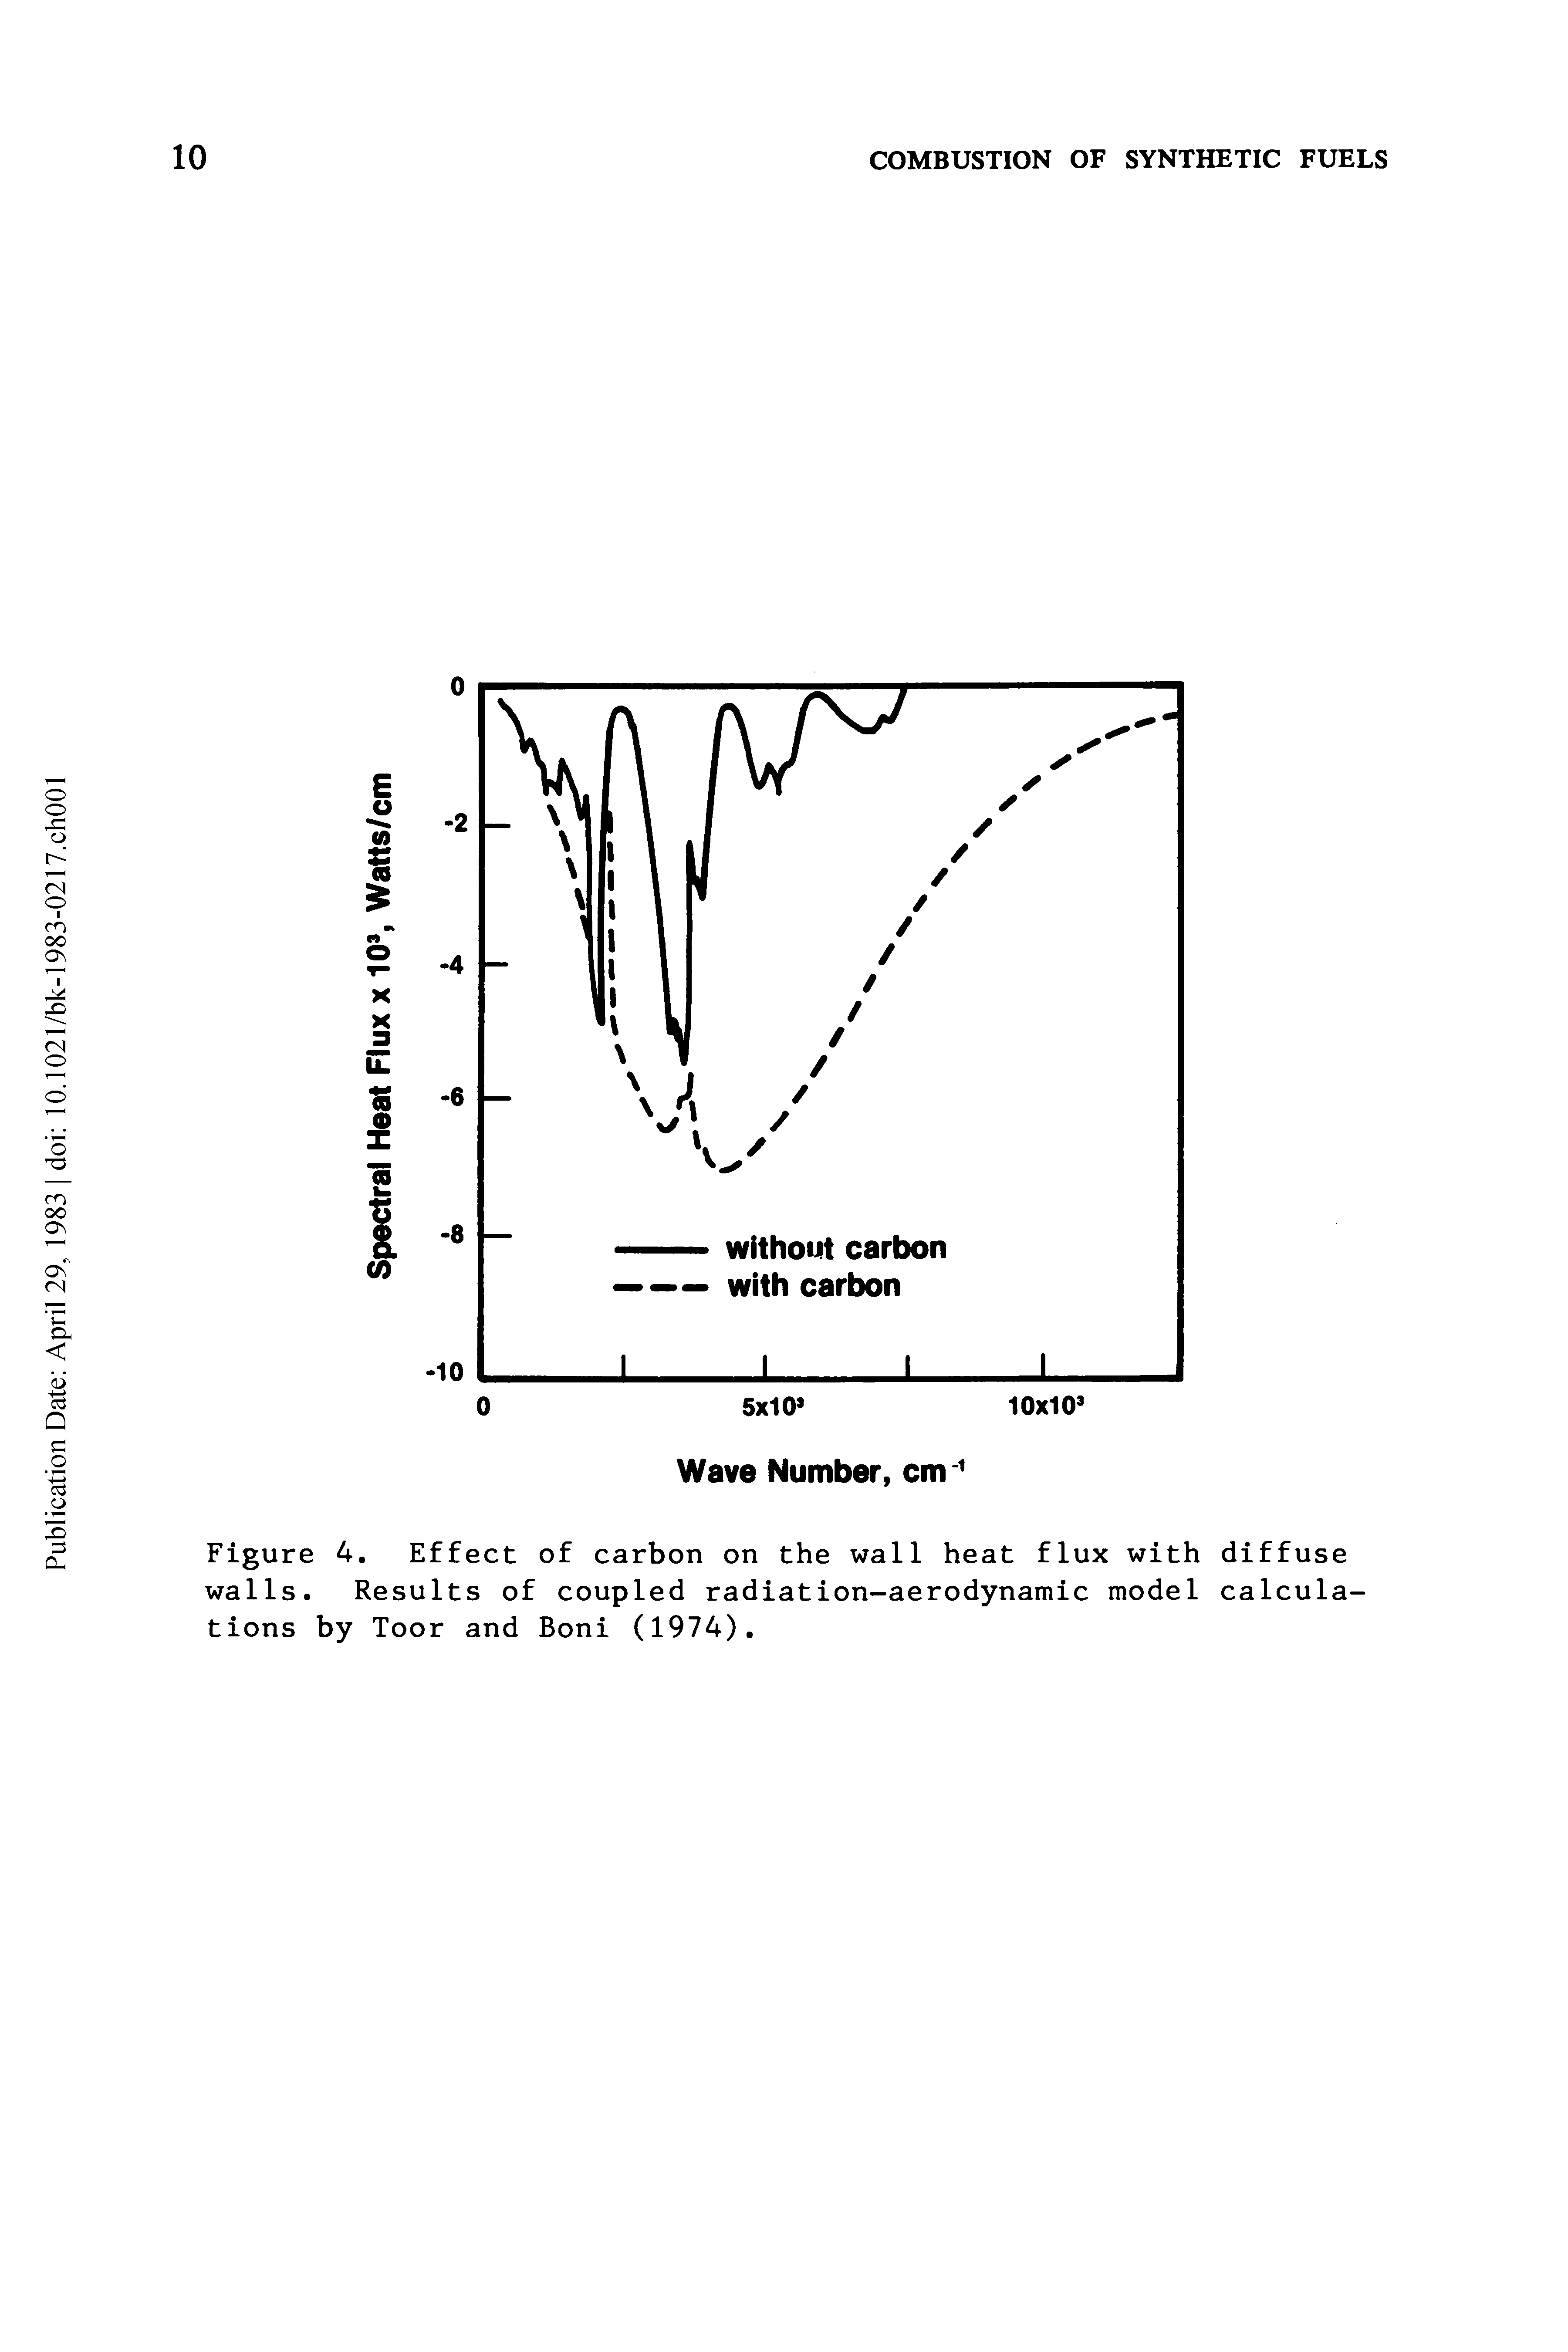 Figure 4. Effect of carbon on the wall heat flux with diffuse walls. Results of coupled radiation-aerodynamic model calculations by Toor and Boni (1974).